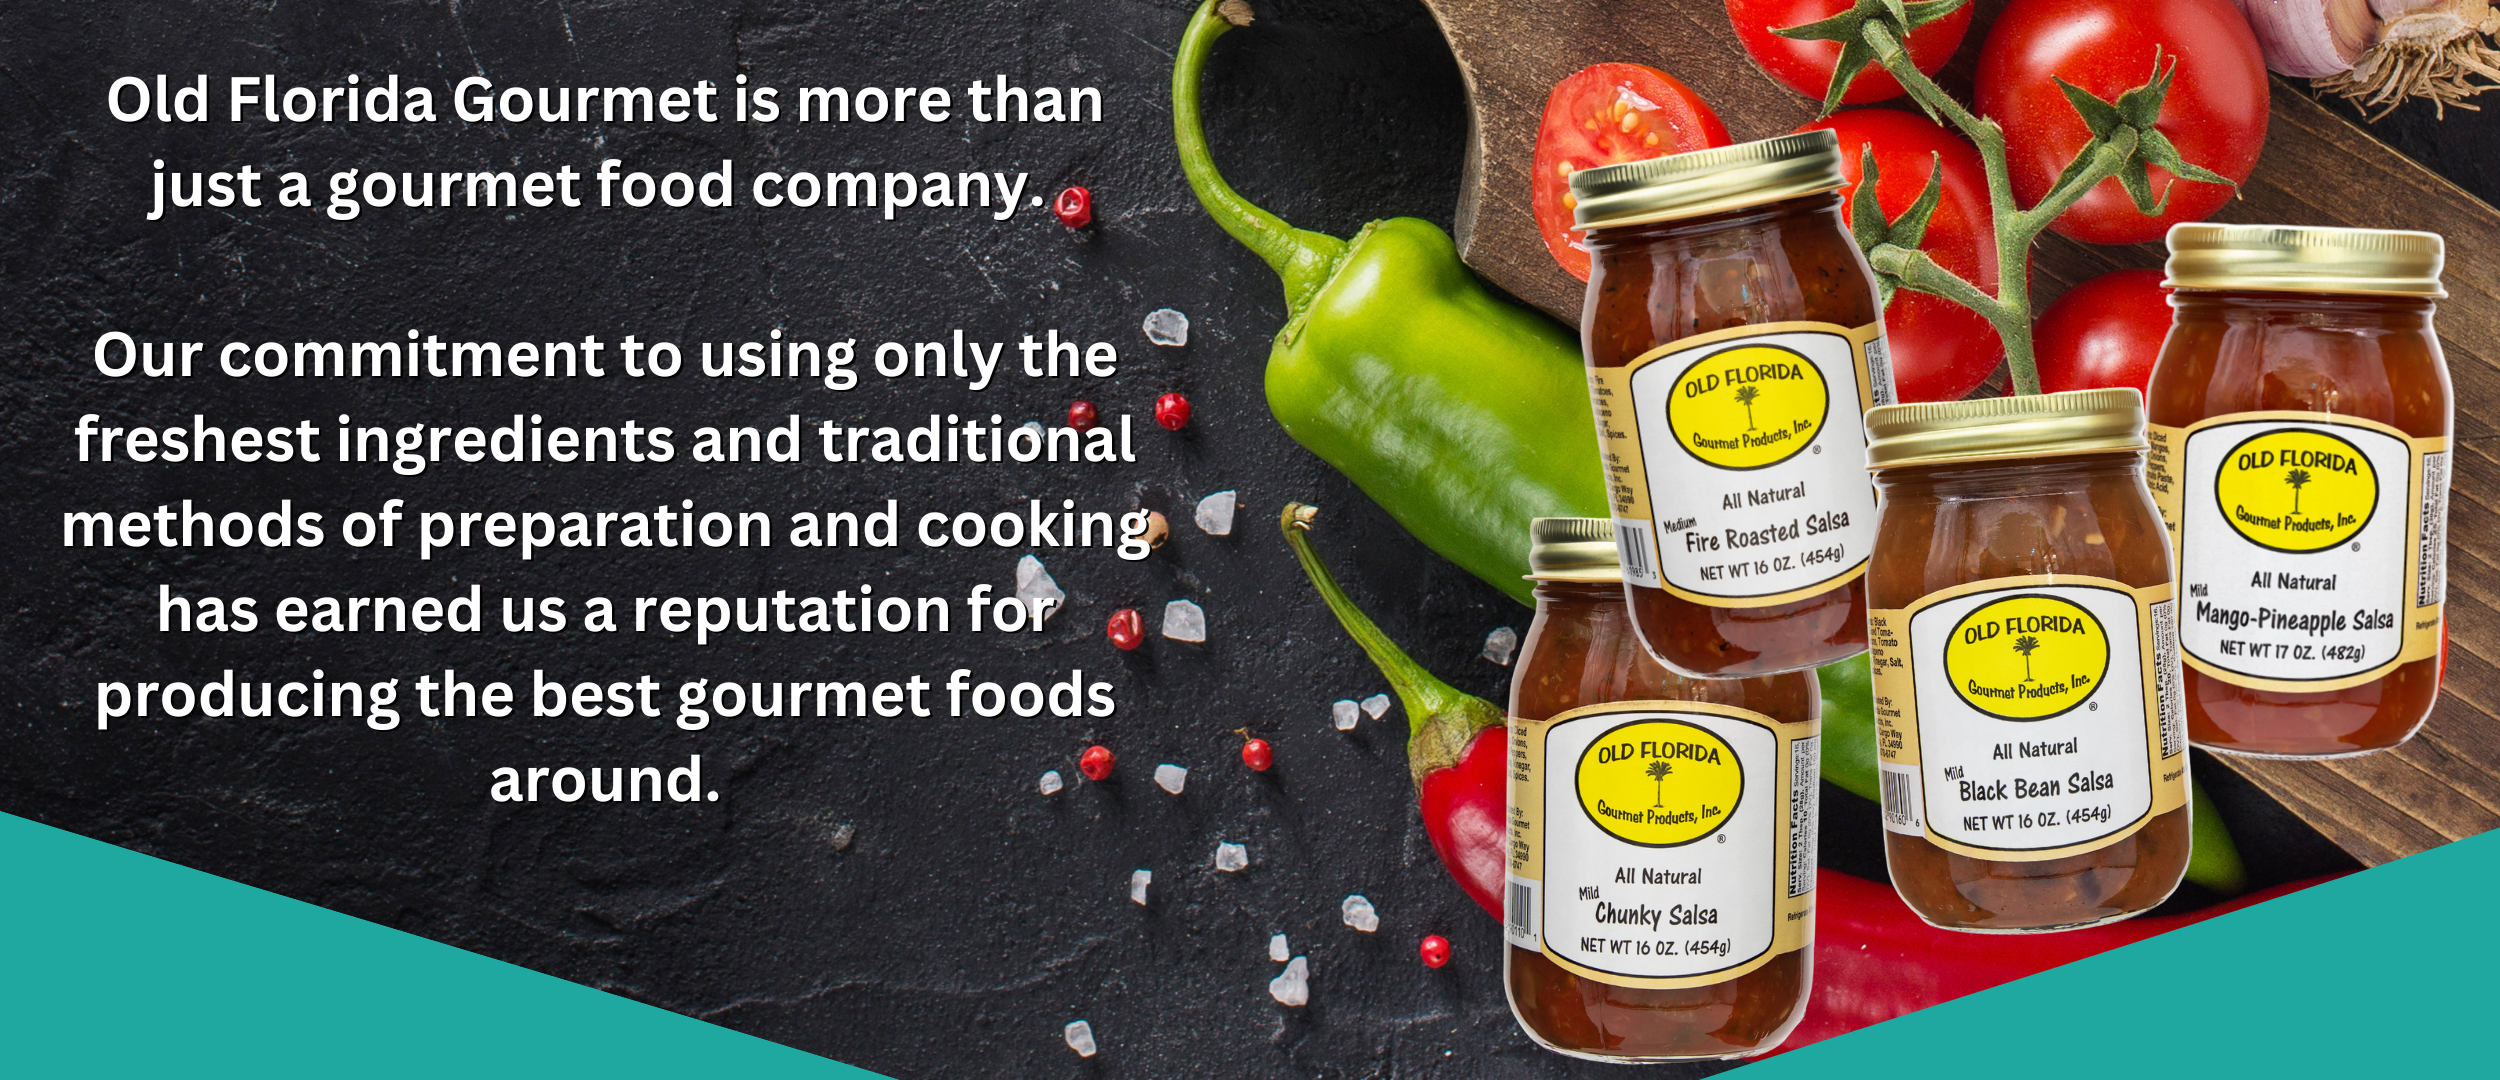 Old Florida Gourmet is more than just a gourmet food company. Our commitment to using only the freshest ingredients and traditional methods of preparation and cooking has earned us a reputation for producing the best gourmet foods around.